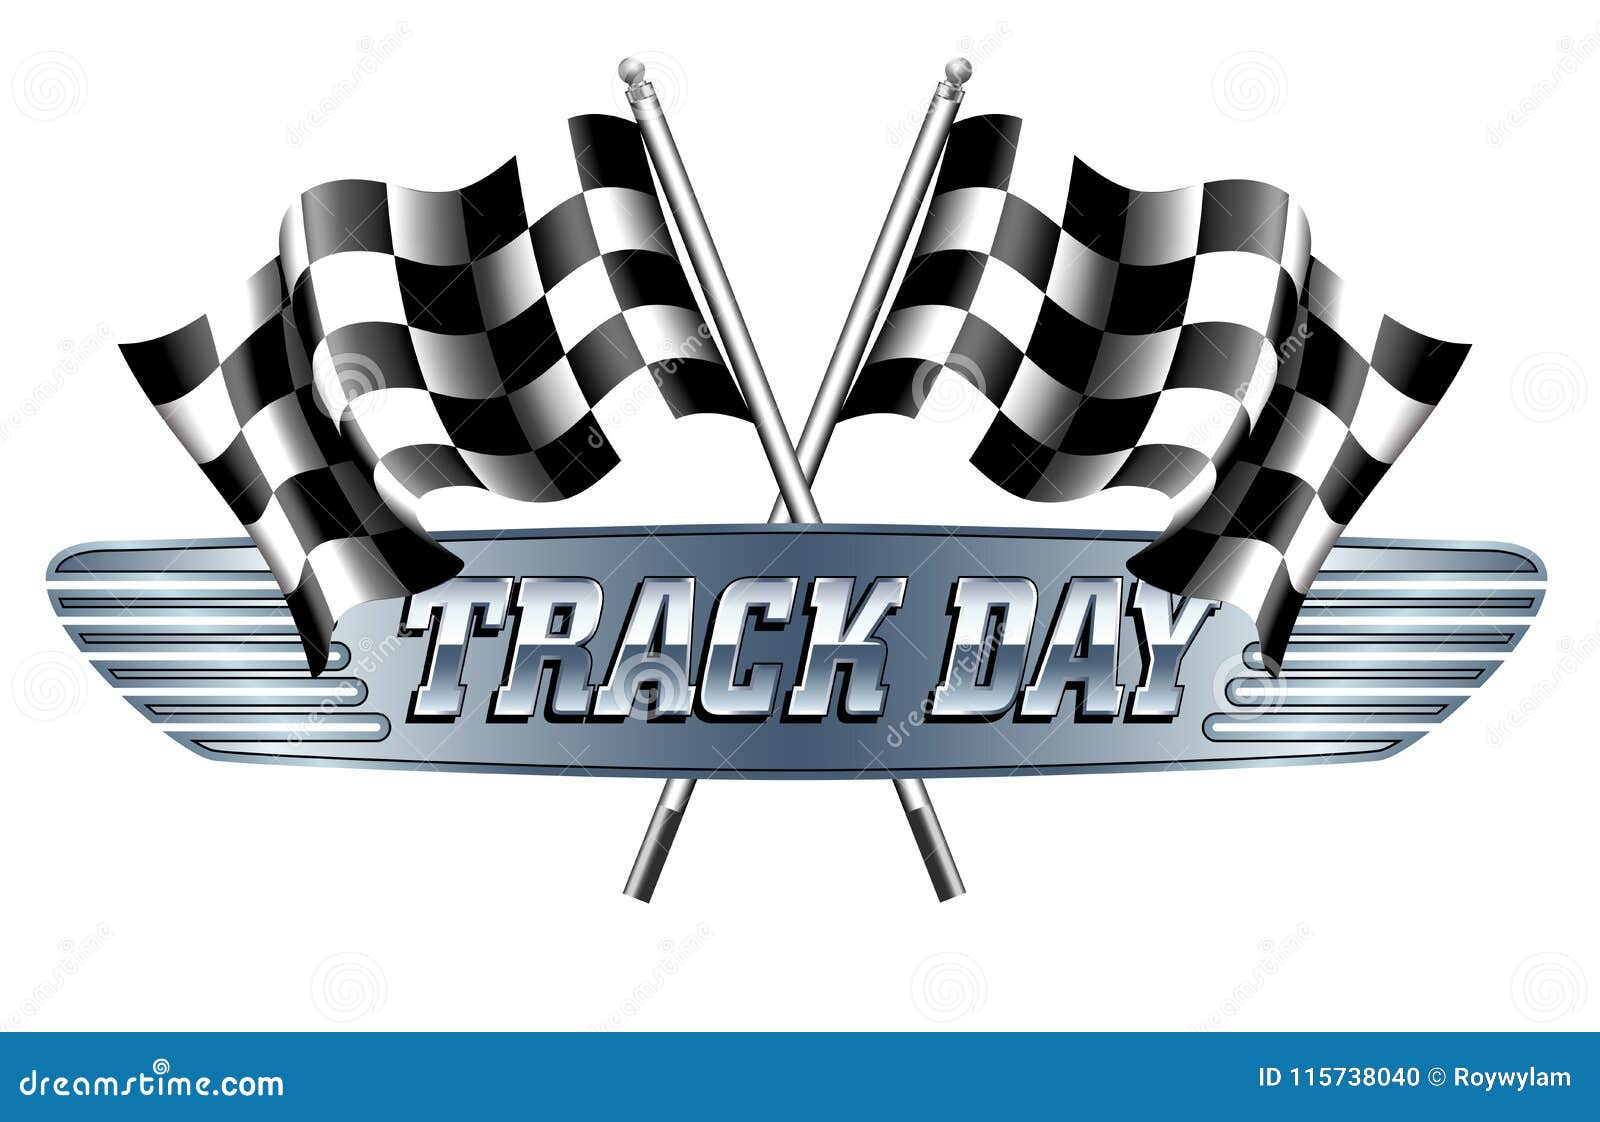 track day checkered, chequered flags motor racing